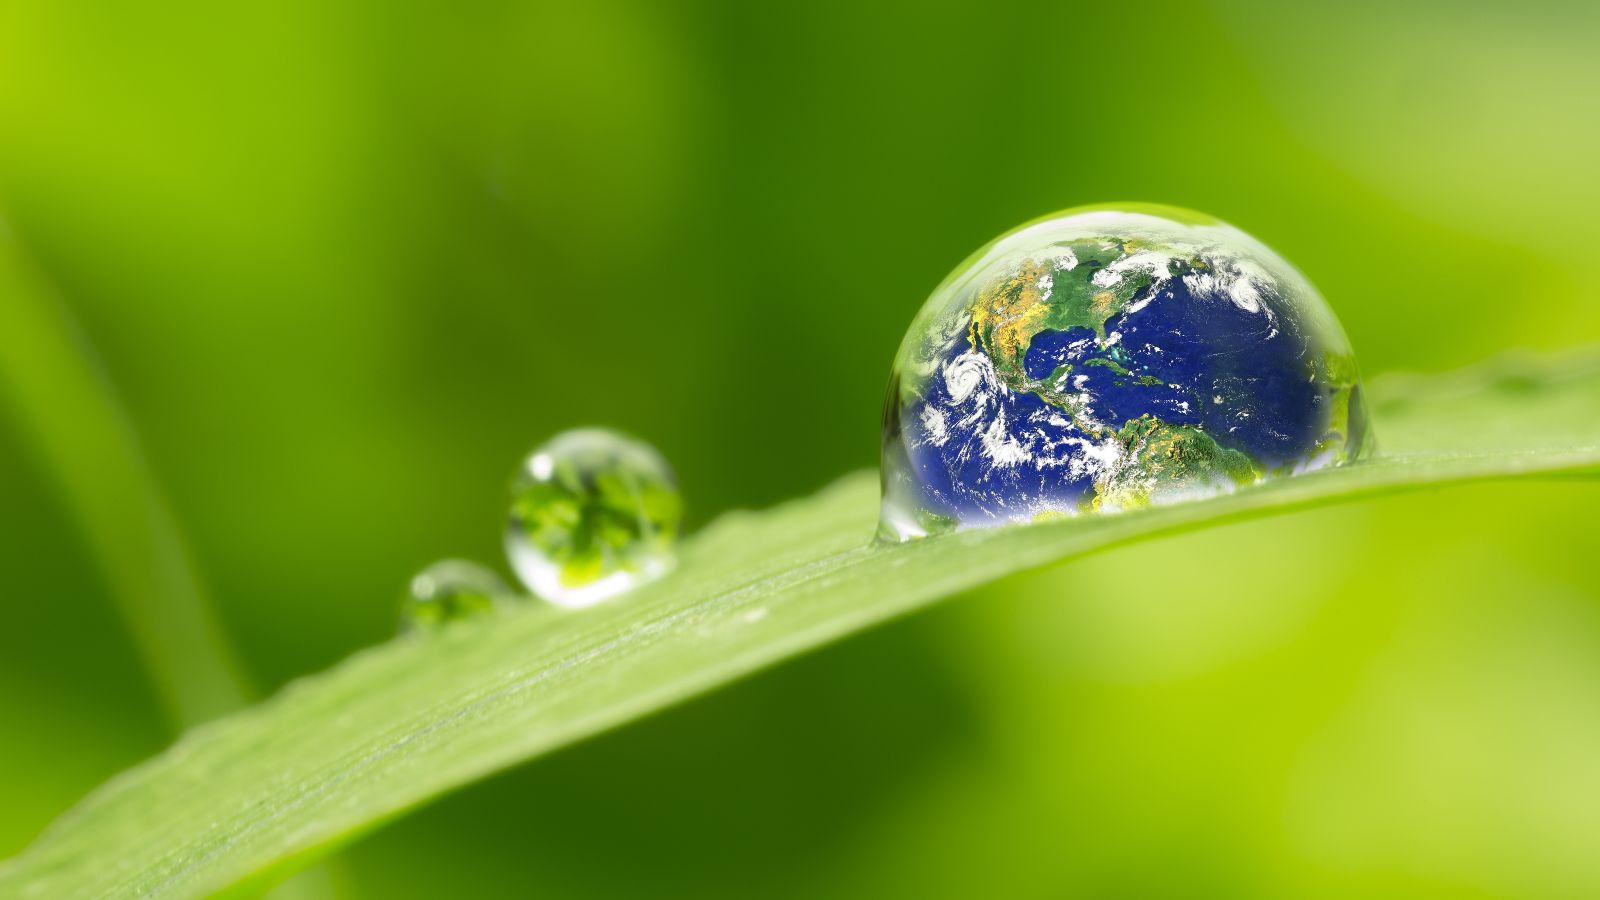 The picture is a photomontage. You can see a green leaf with a drop on it. A globe can be seen in the drop. 